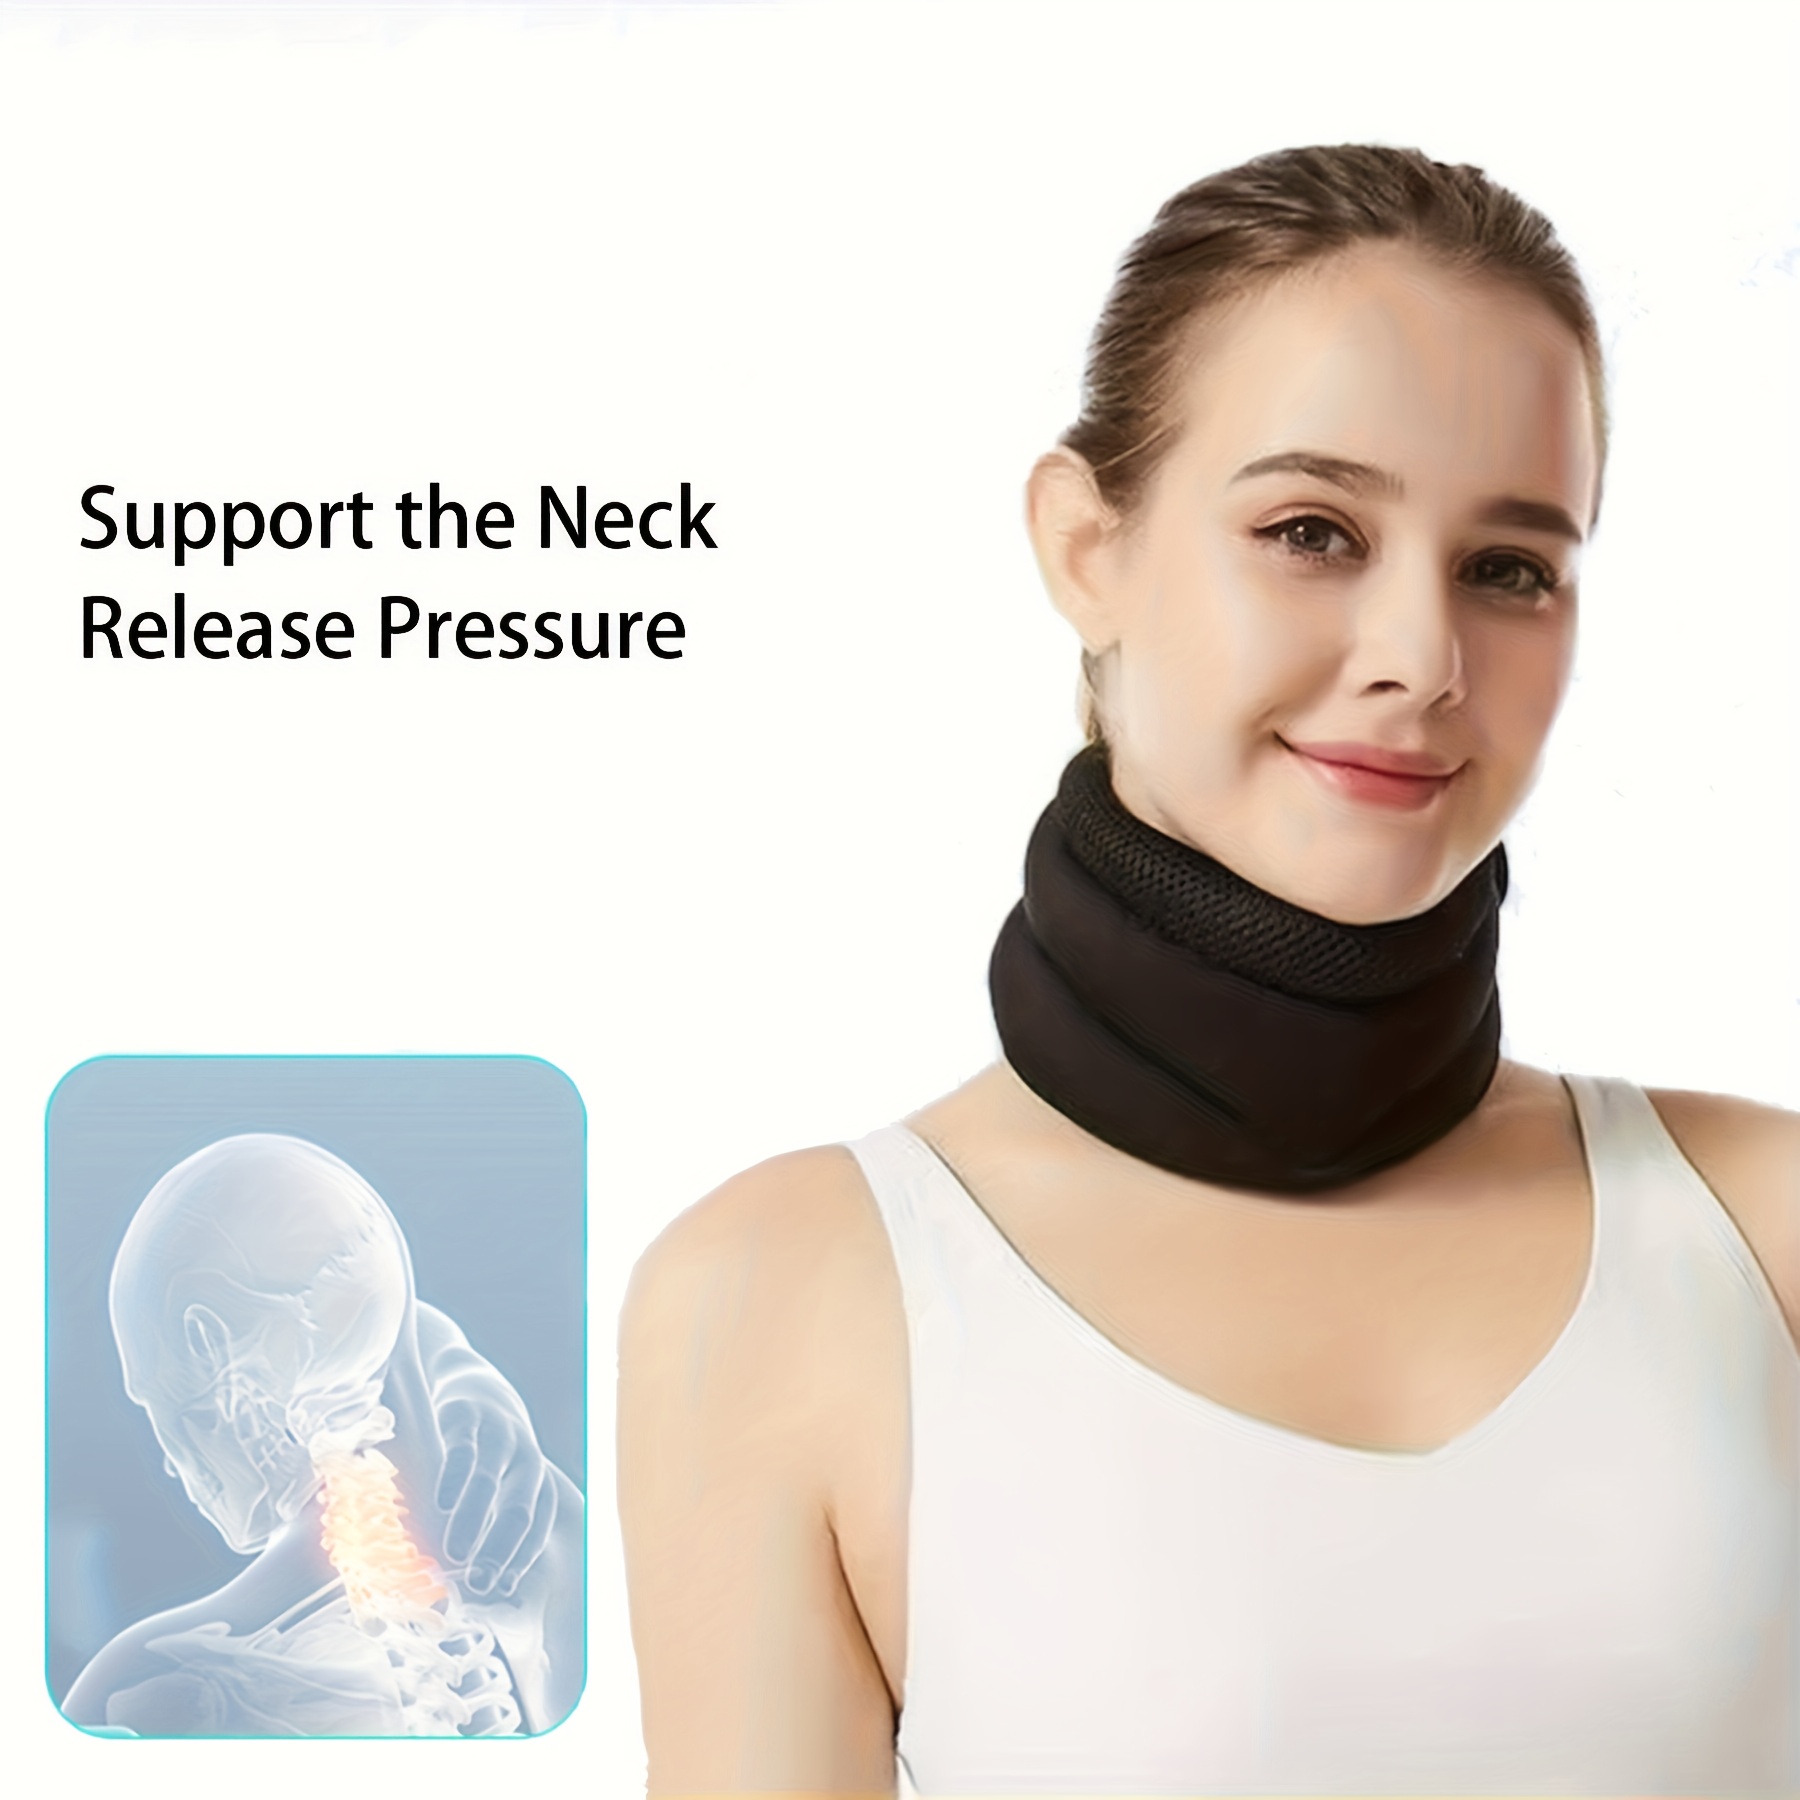 Neck Brace For Neck Pain And Support, Foam Cervical Collar For Sleeping,  Vertebral * Wrap Alignment And Stabilize, Neck Support Brace For Press